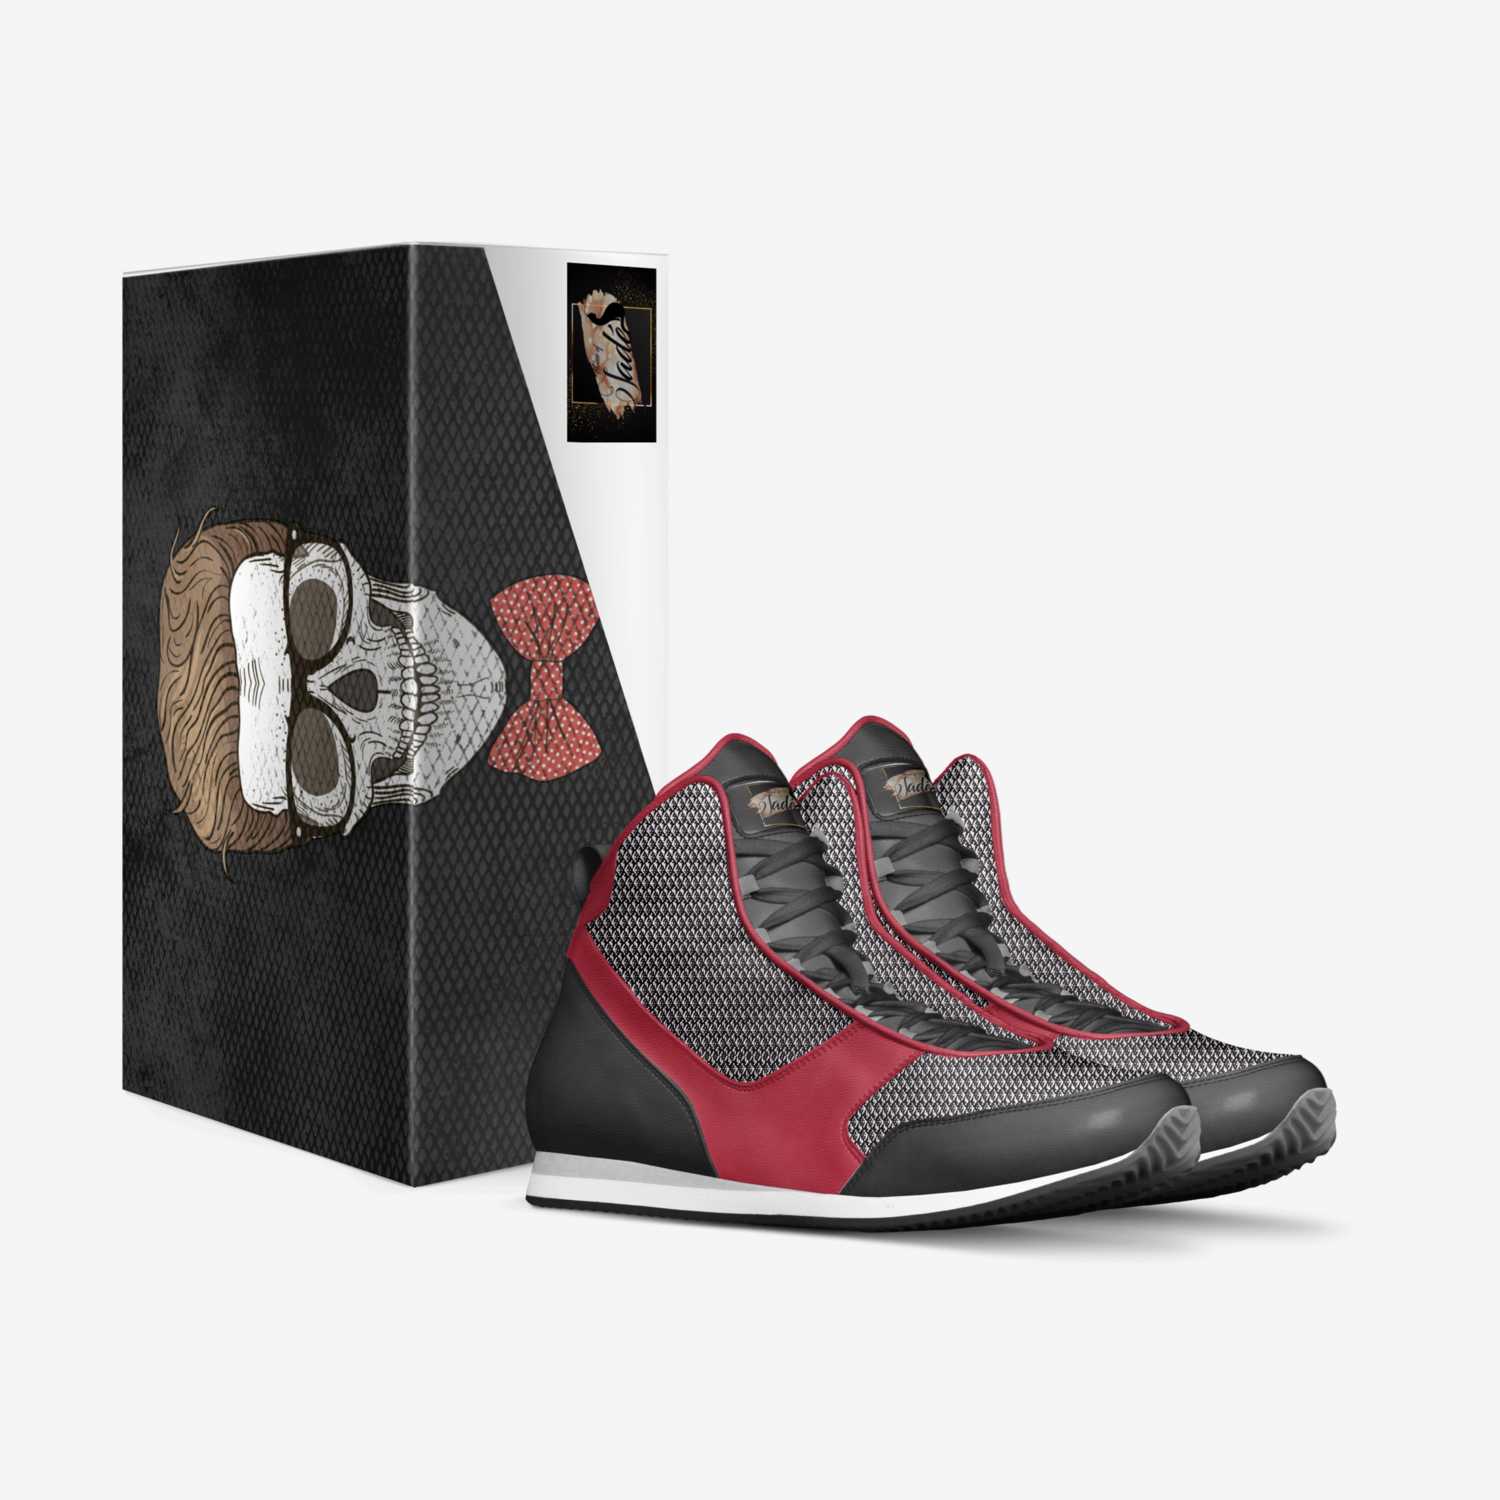 The Drifter  custom made in Italy shoes by Jade Cervantes | Box view